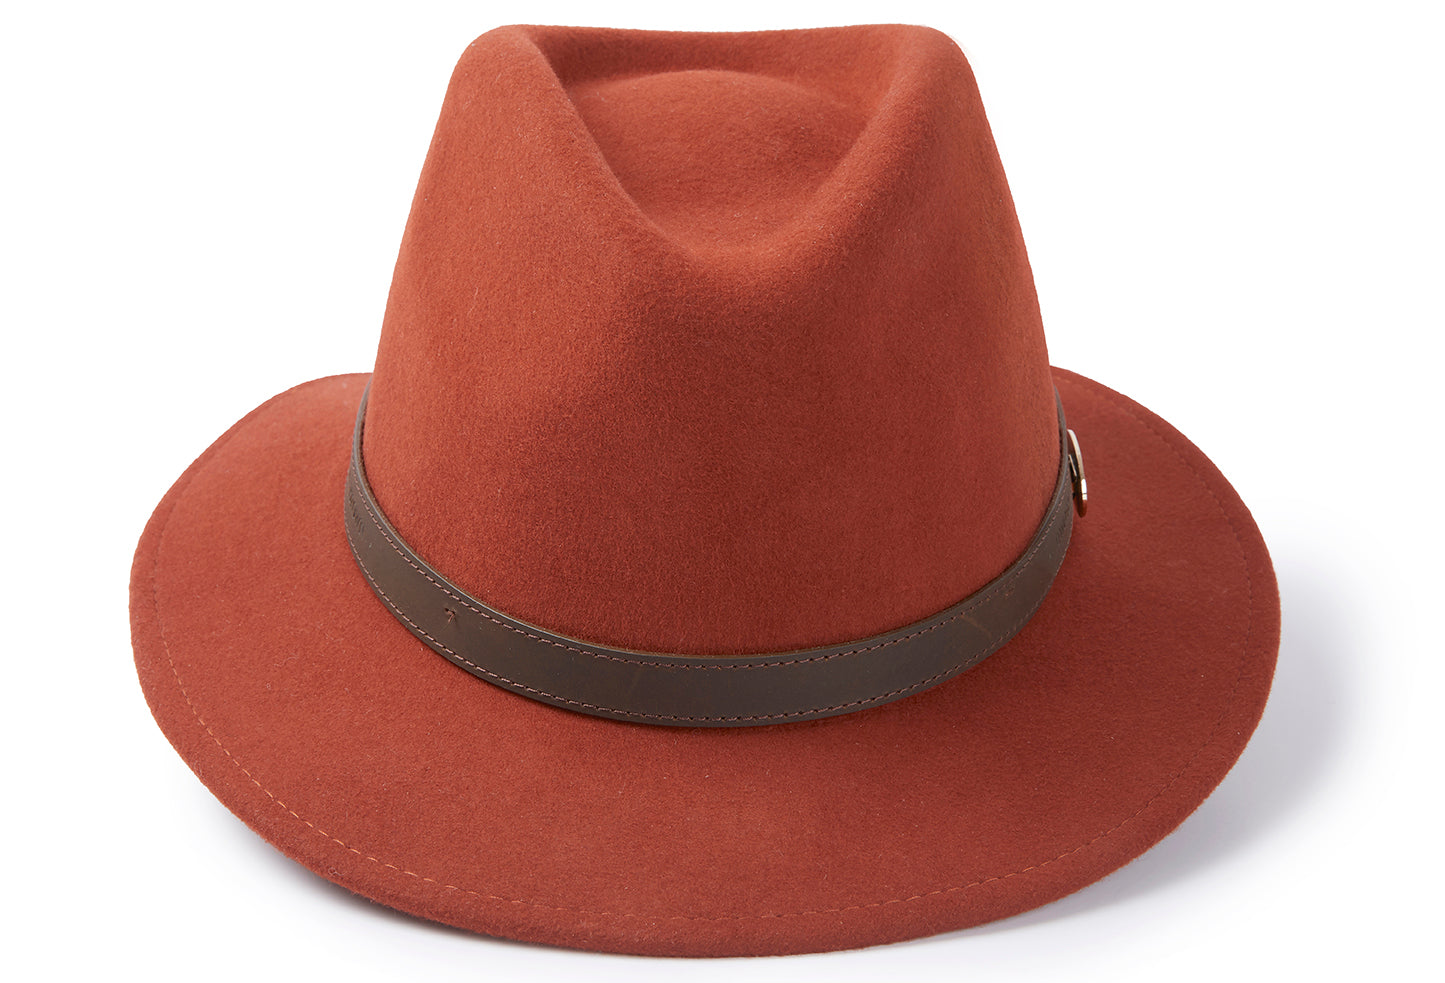 Hicks & Brown The Suffolk Fedora in Cinnamon (No Feather)